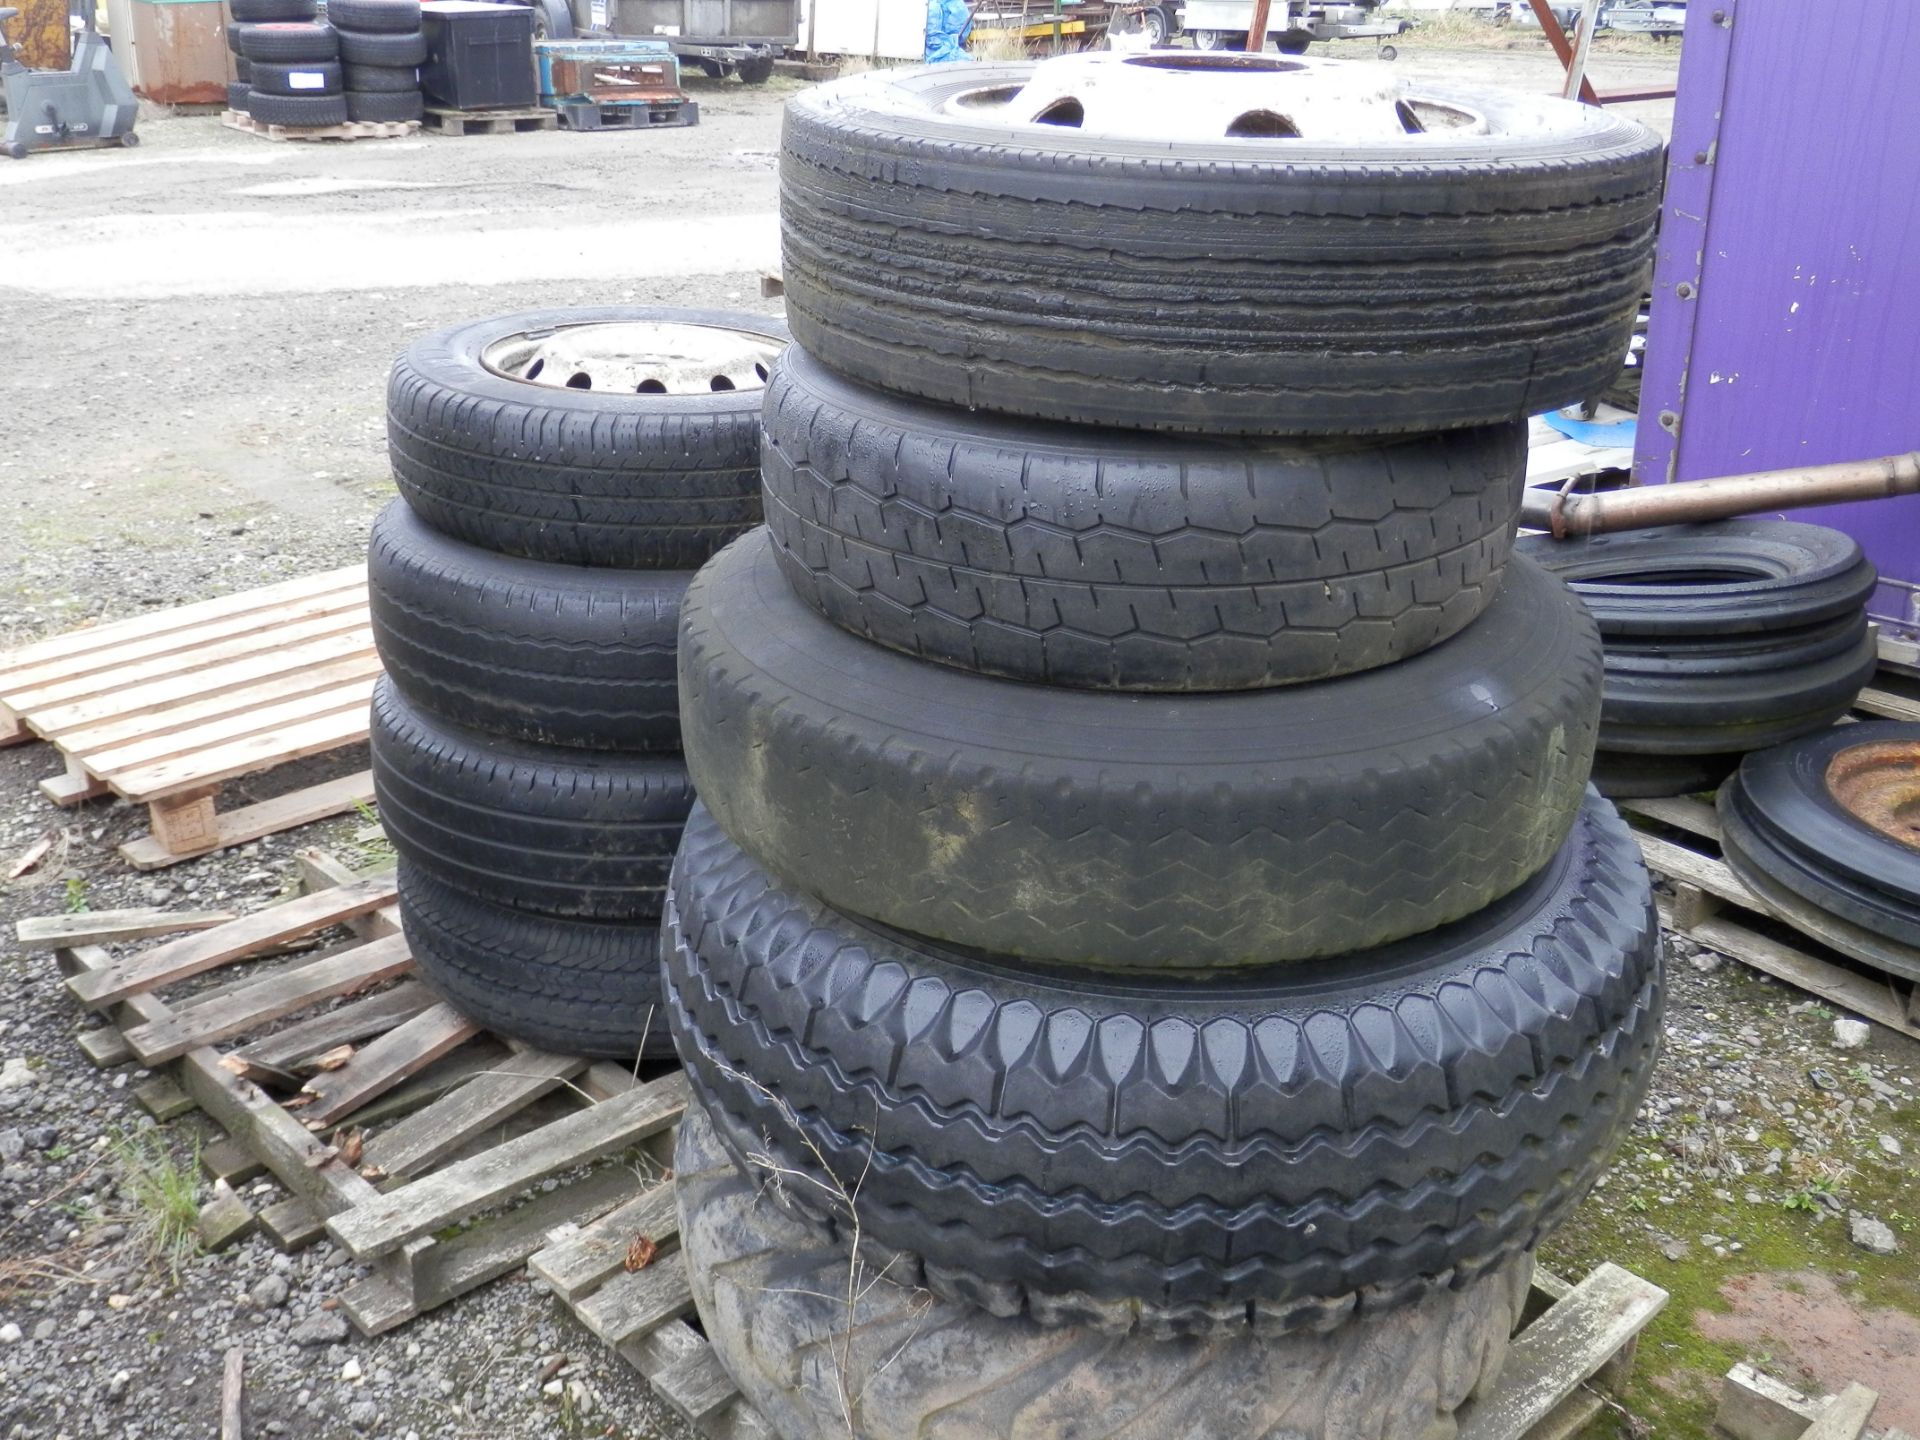 85 + ASSORTED LORRY, CAR & TRAILER TYRES & WHEELS, AS PICTURED. BUYER TO COLLECT COMPLETE - Image 9 of 10